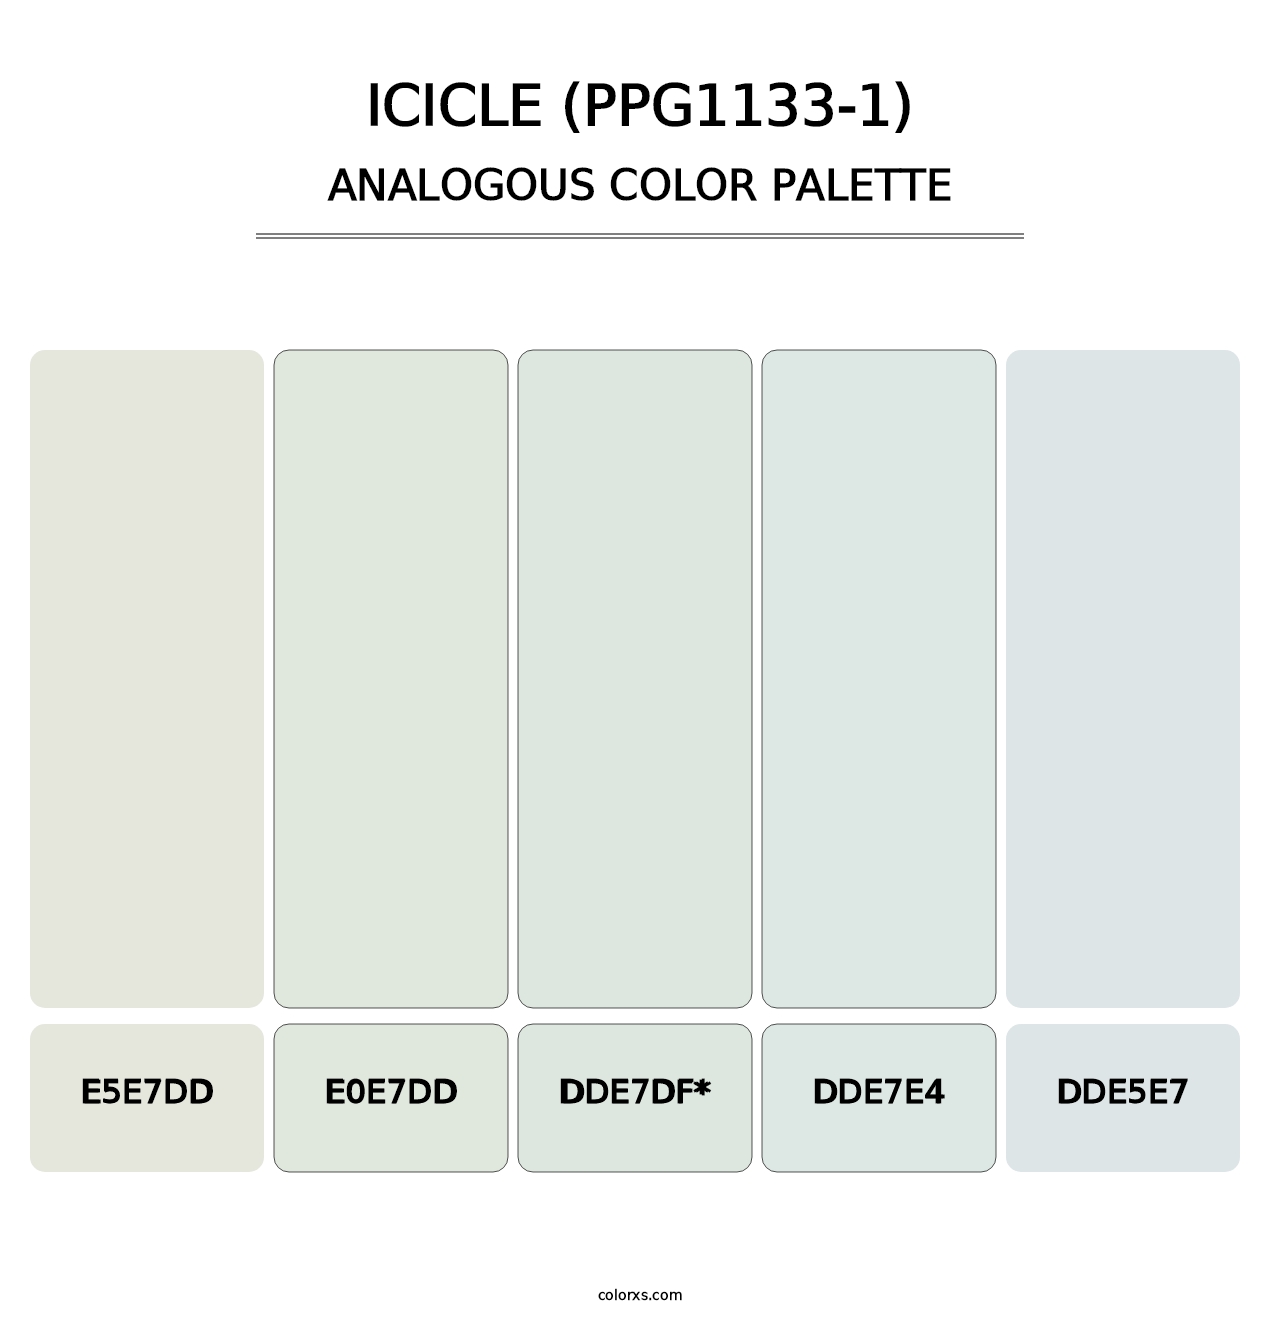 Icicle (PPG1133-1) - Analogous Color Palette